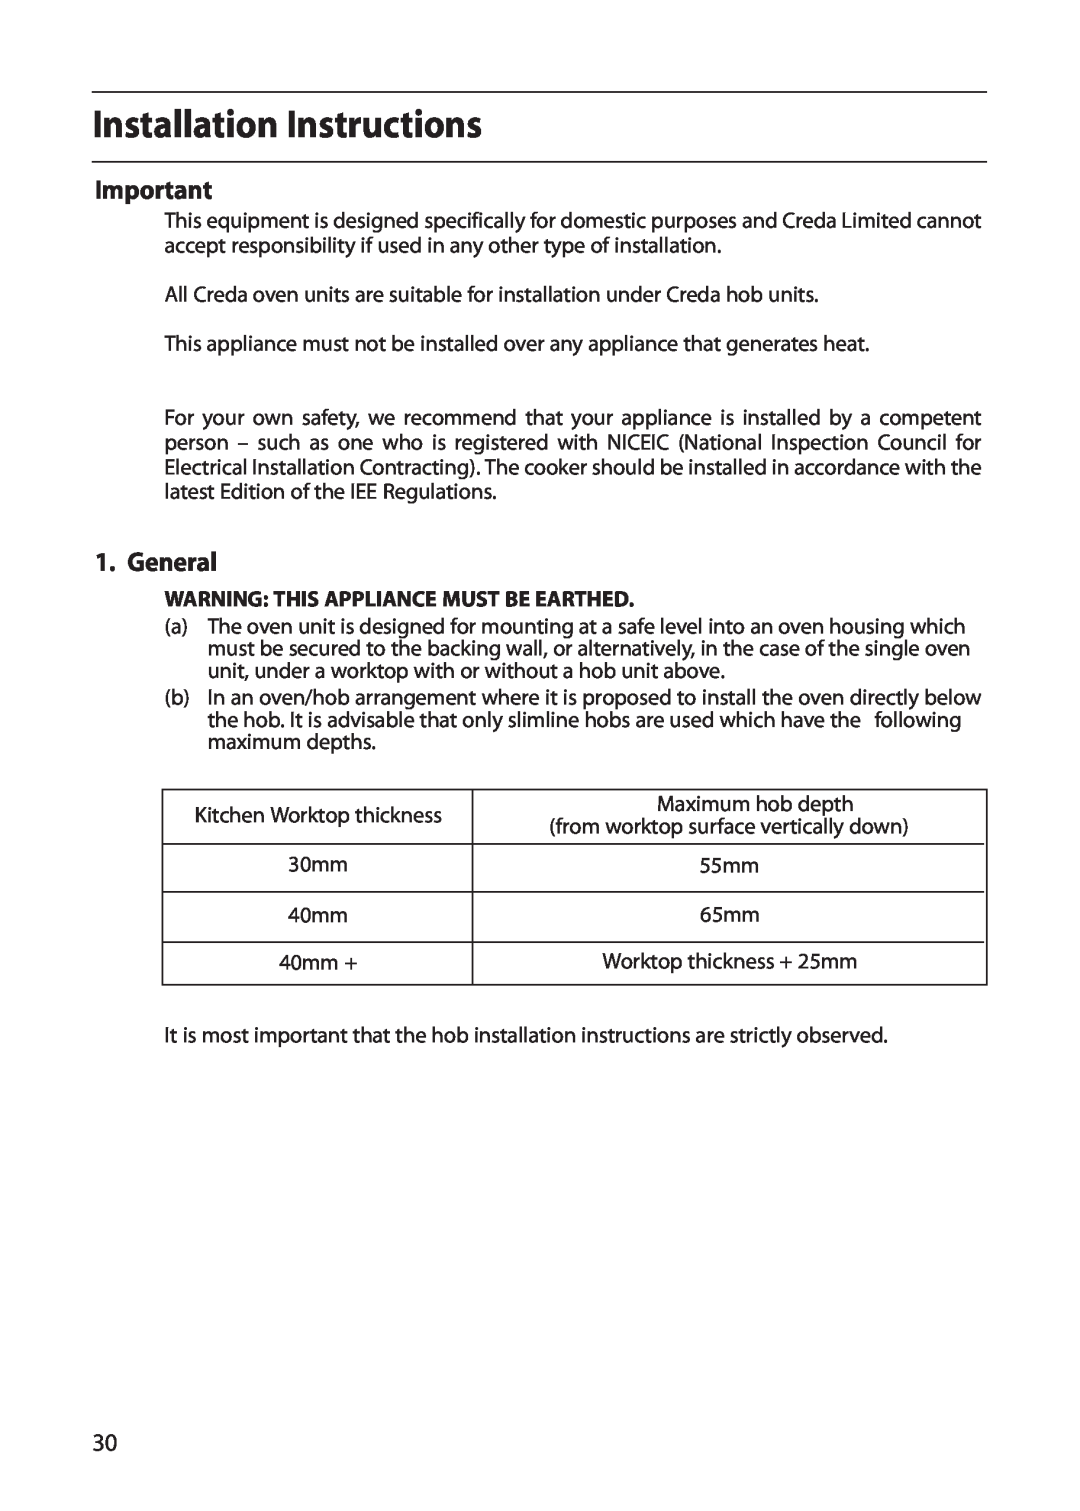 Creda CB01E manual Installation Instructions, General, Warning This Appliance Must Be Earthed 